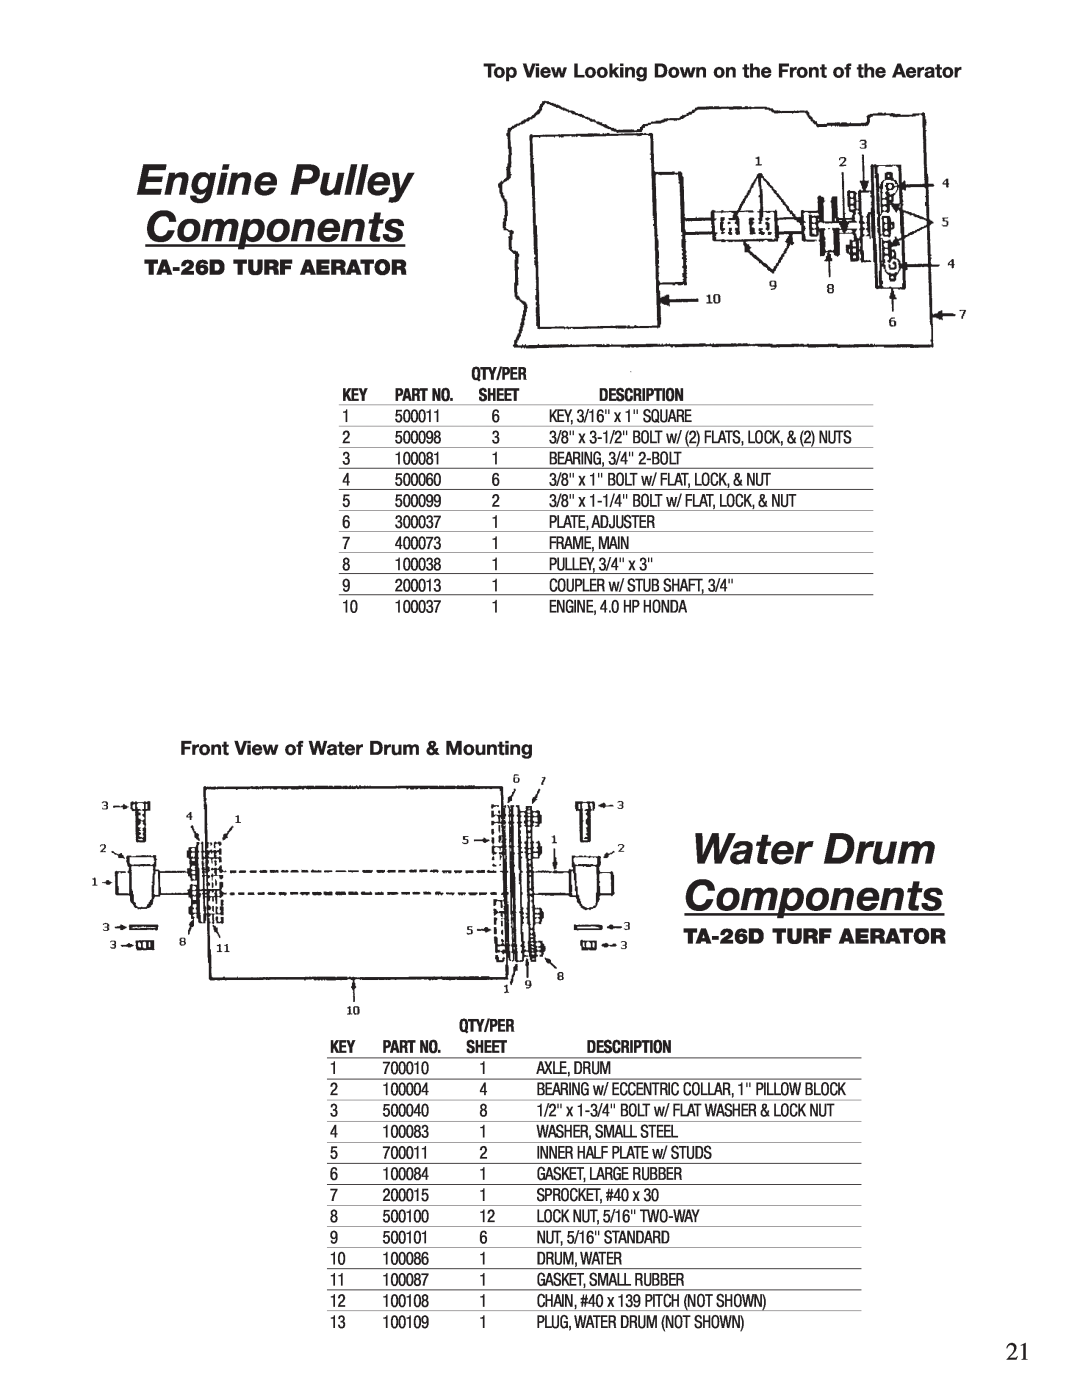 Classen 48-RT Engine Pulley Components, Water Drum Components, TA-26D TURF AERATOR, Front View of Water Drum & Mounting 